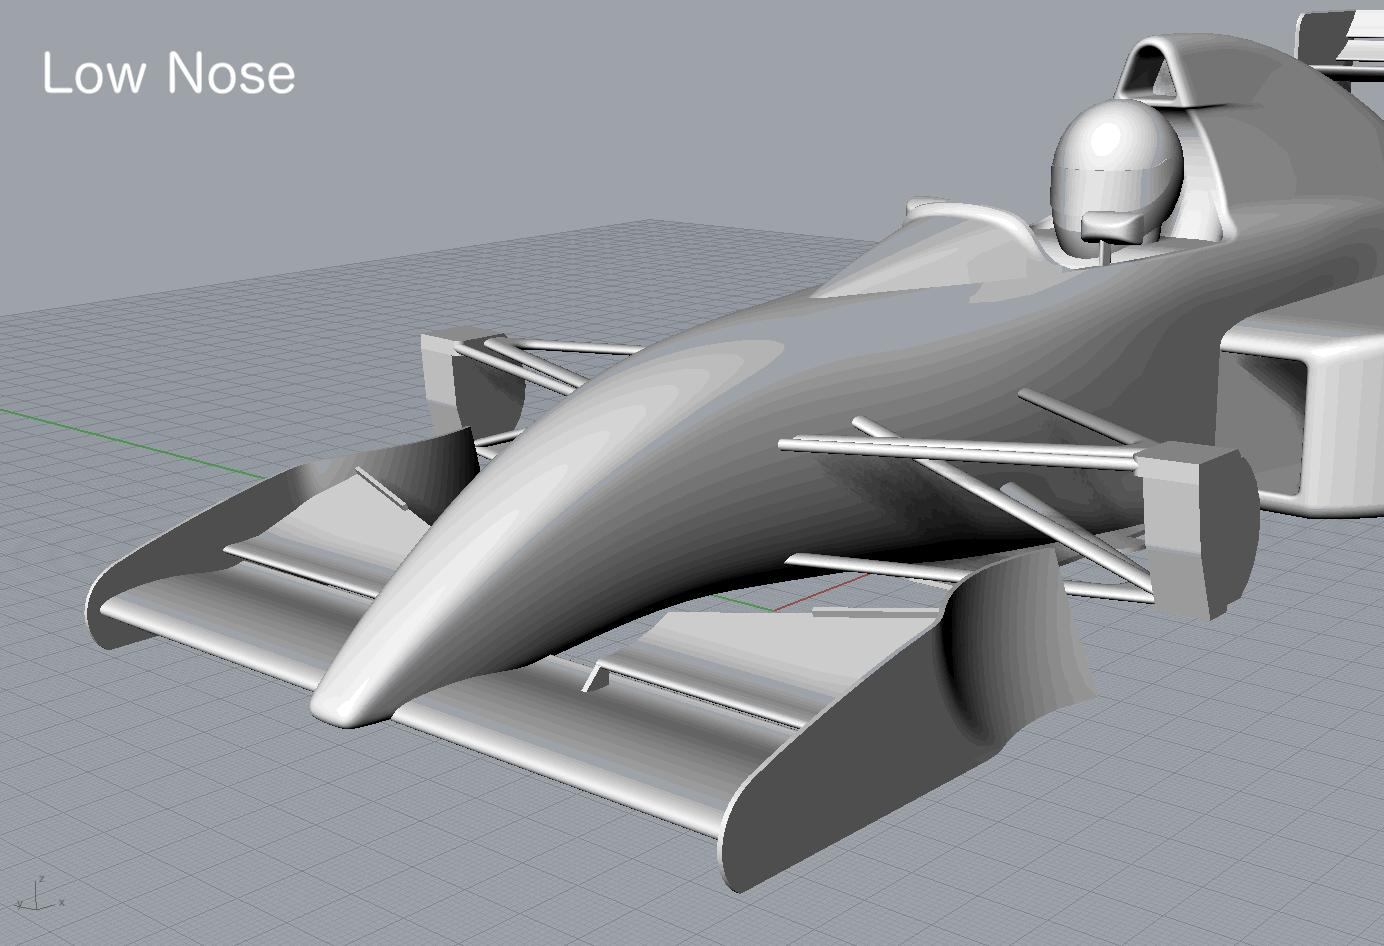 1990s-f1s_fr-wing_nose-monocoque_mono-post-nose_animated